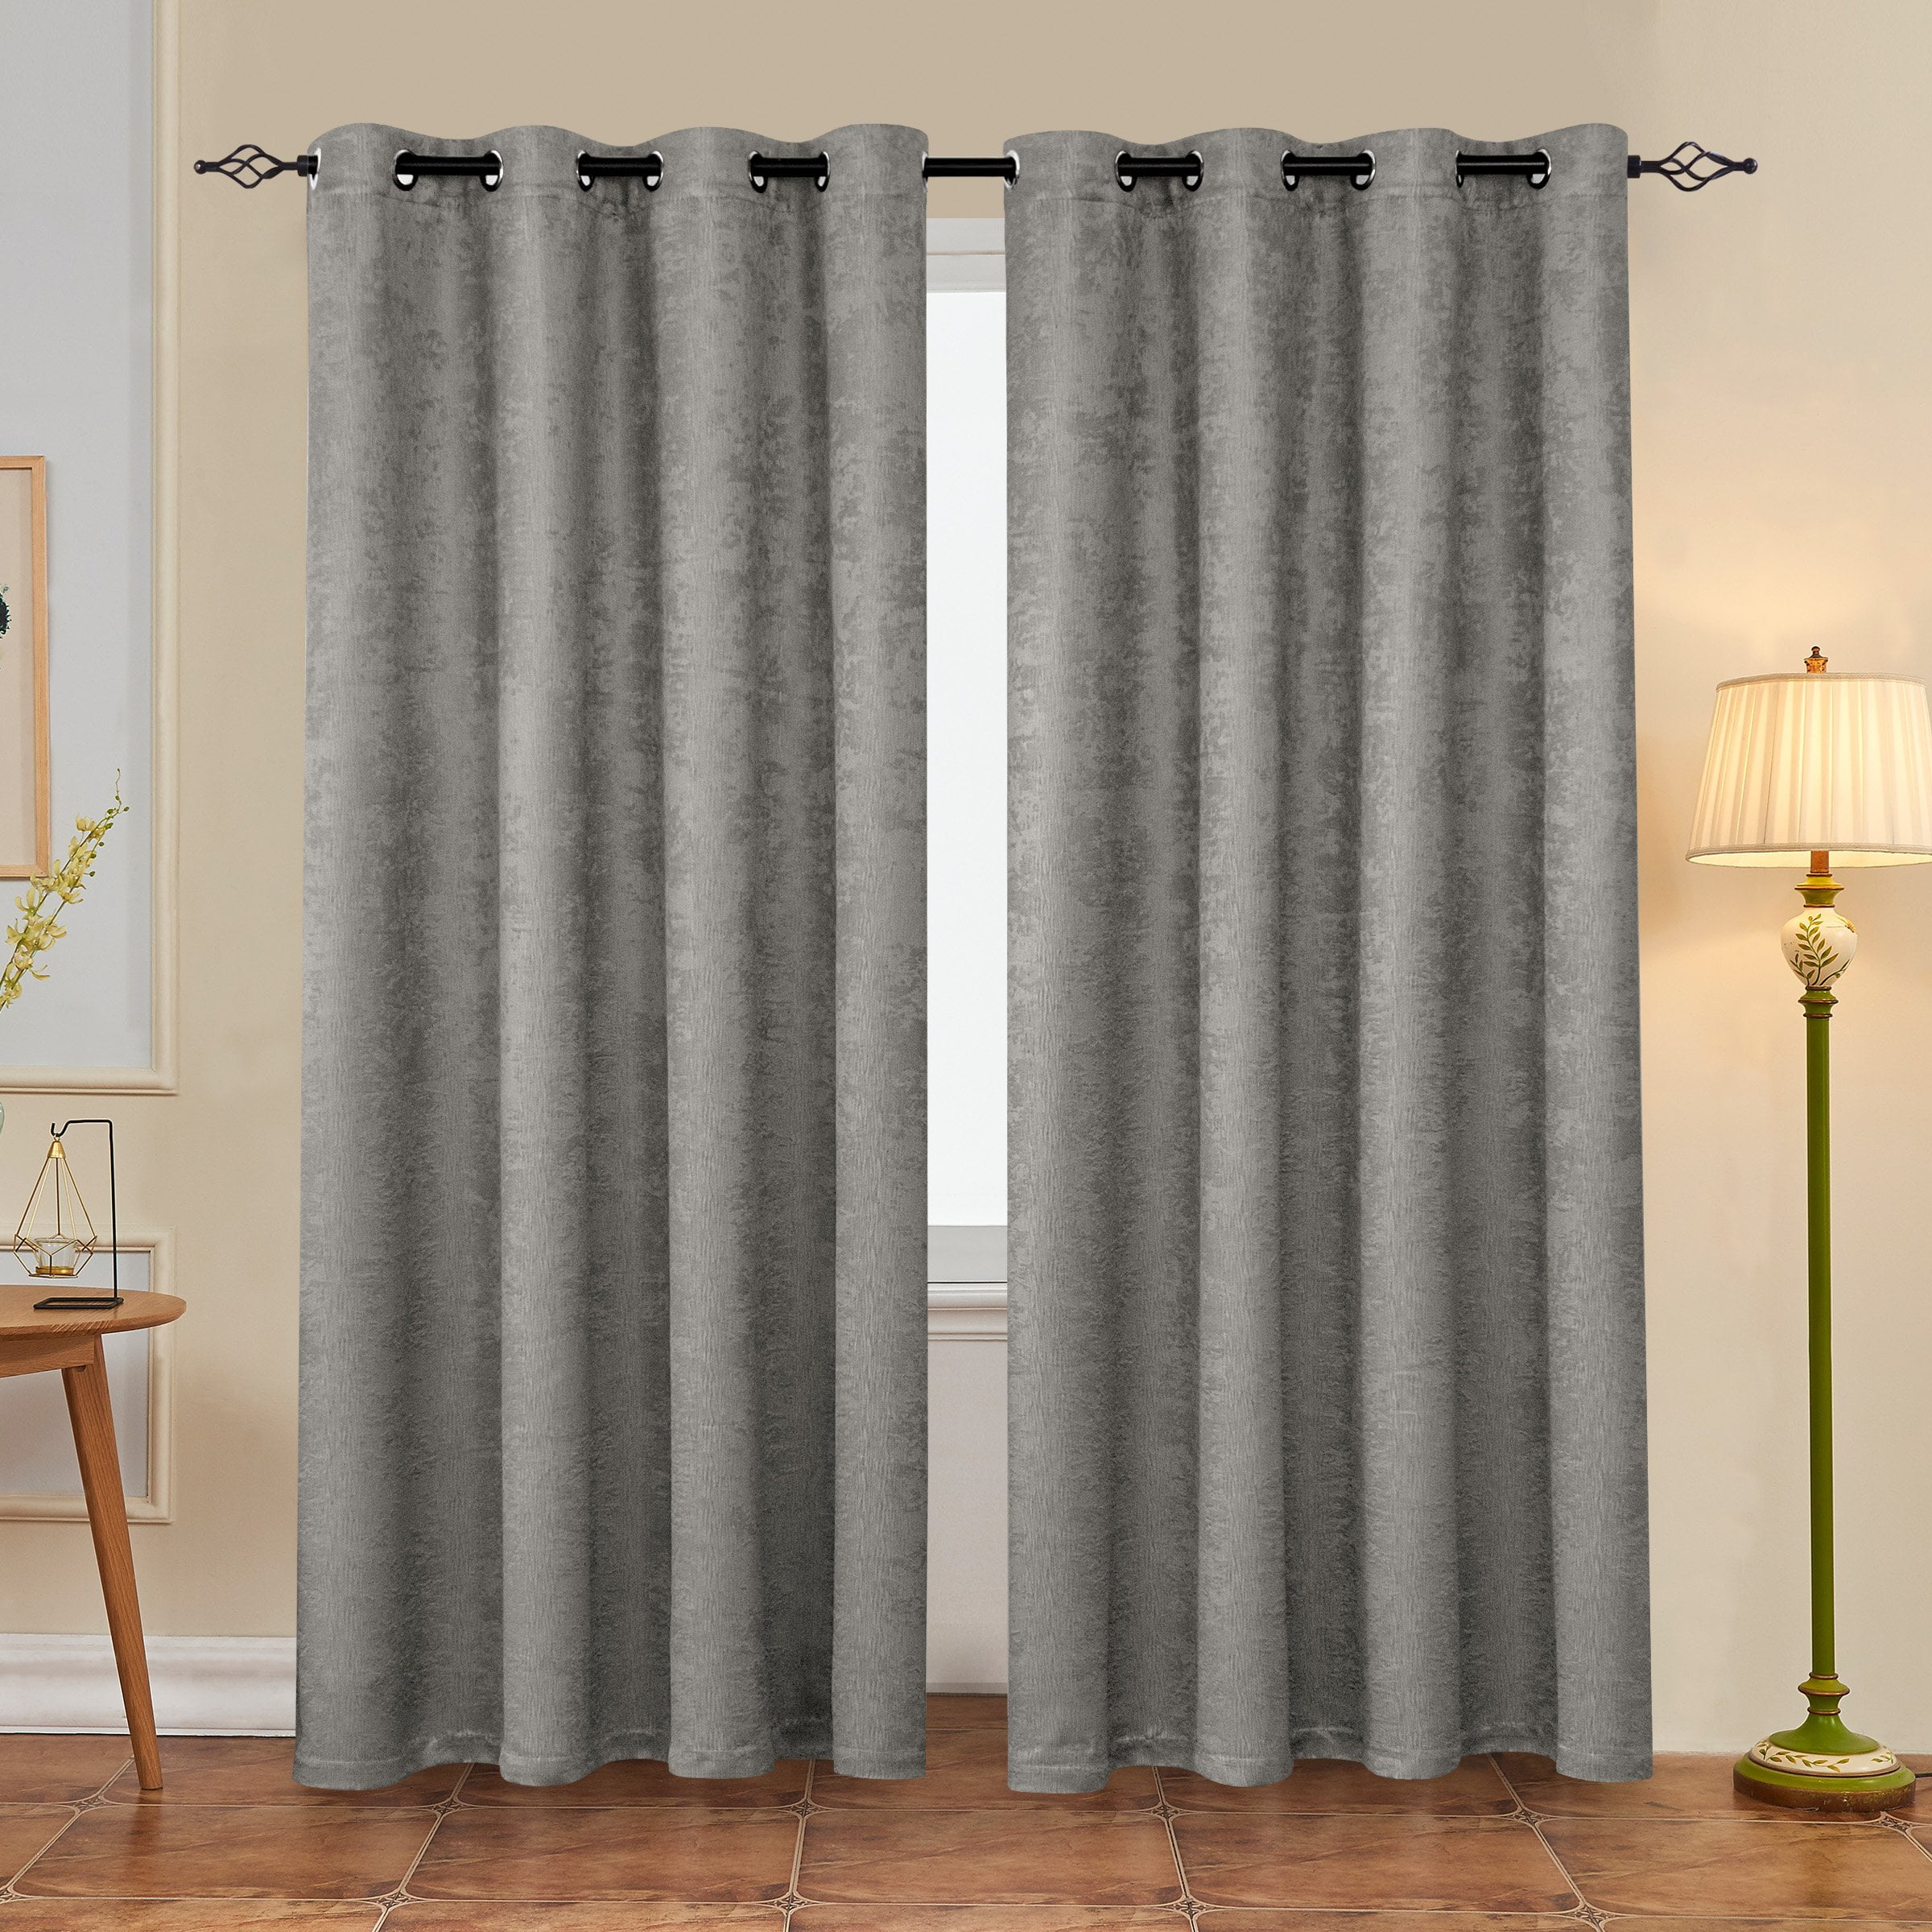 Animal Curtains White Wolf on the Rocks Window Drapes 2 Panel Set 108x63 Inches 